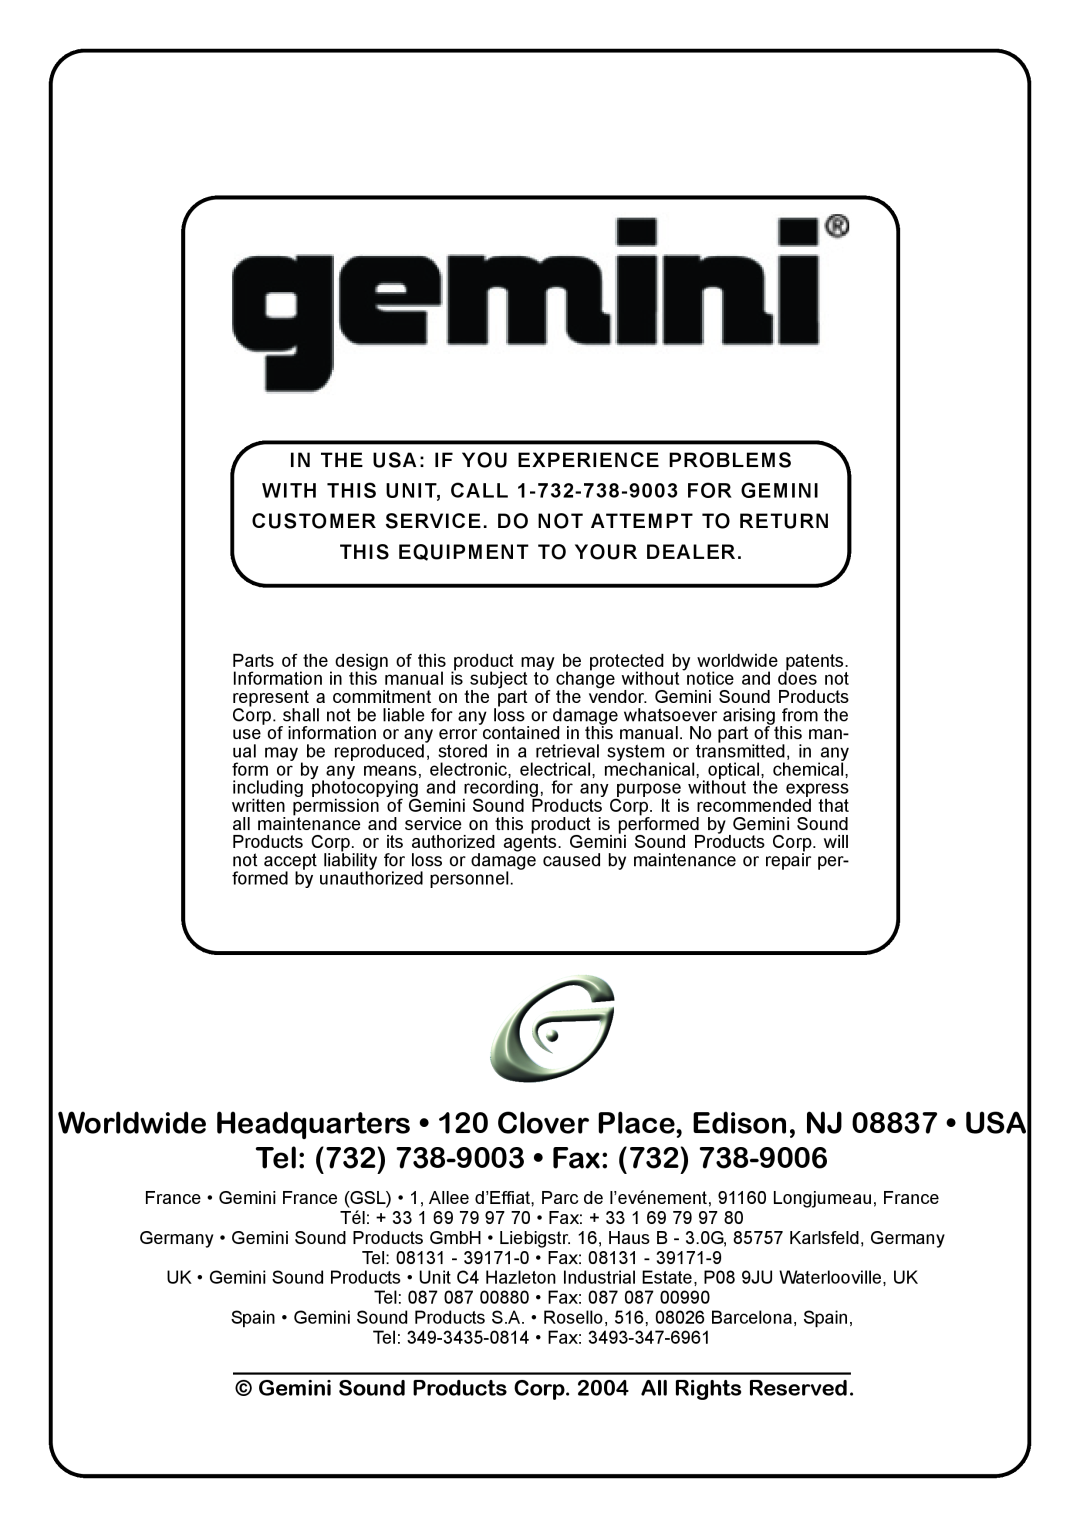 Gemini TT-03 In The Usa If You Experience Problems, WITH THIS UNIT, CALL 1-732-738-9003FOR GEMINI, Tel 732 738-9003 Fax 